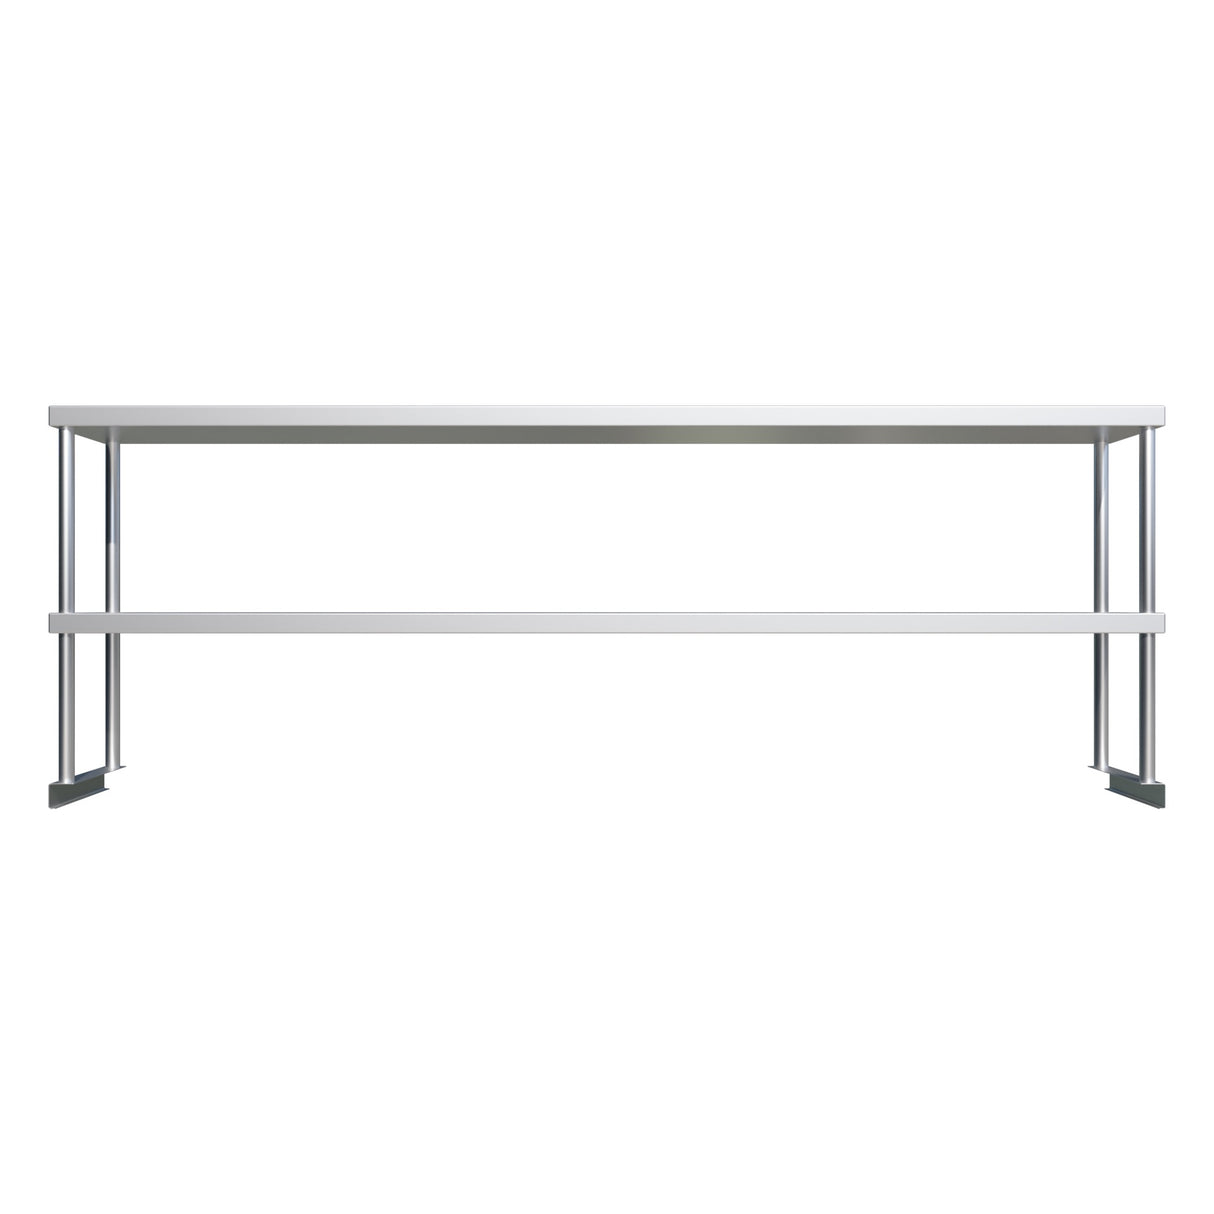 Empire Stainless Steel Double Over Shelf 1800mm Wide - OSD-1272 Stainless Steel Over Shelves Empire   